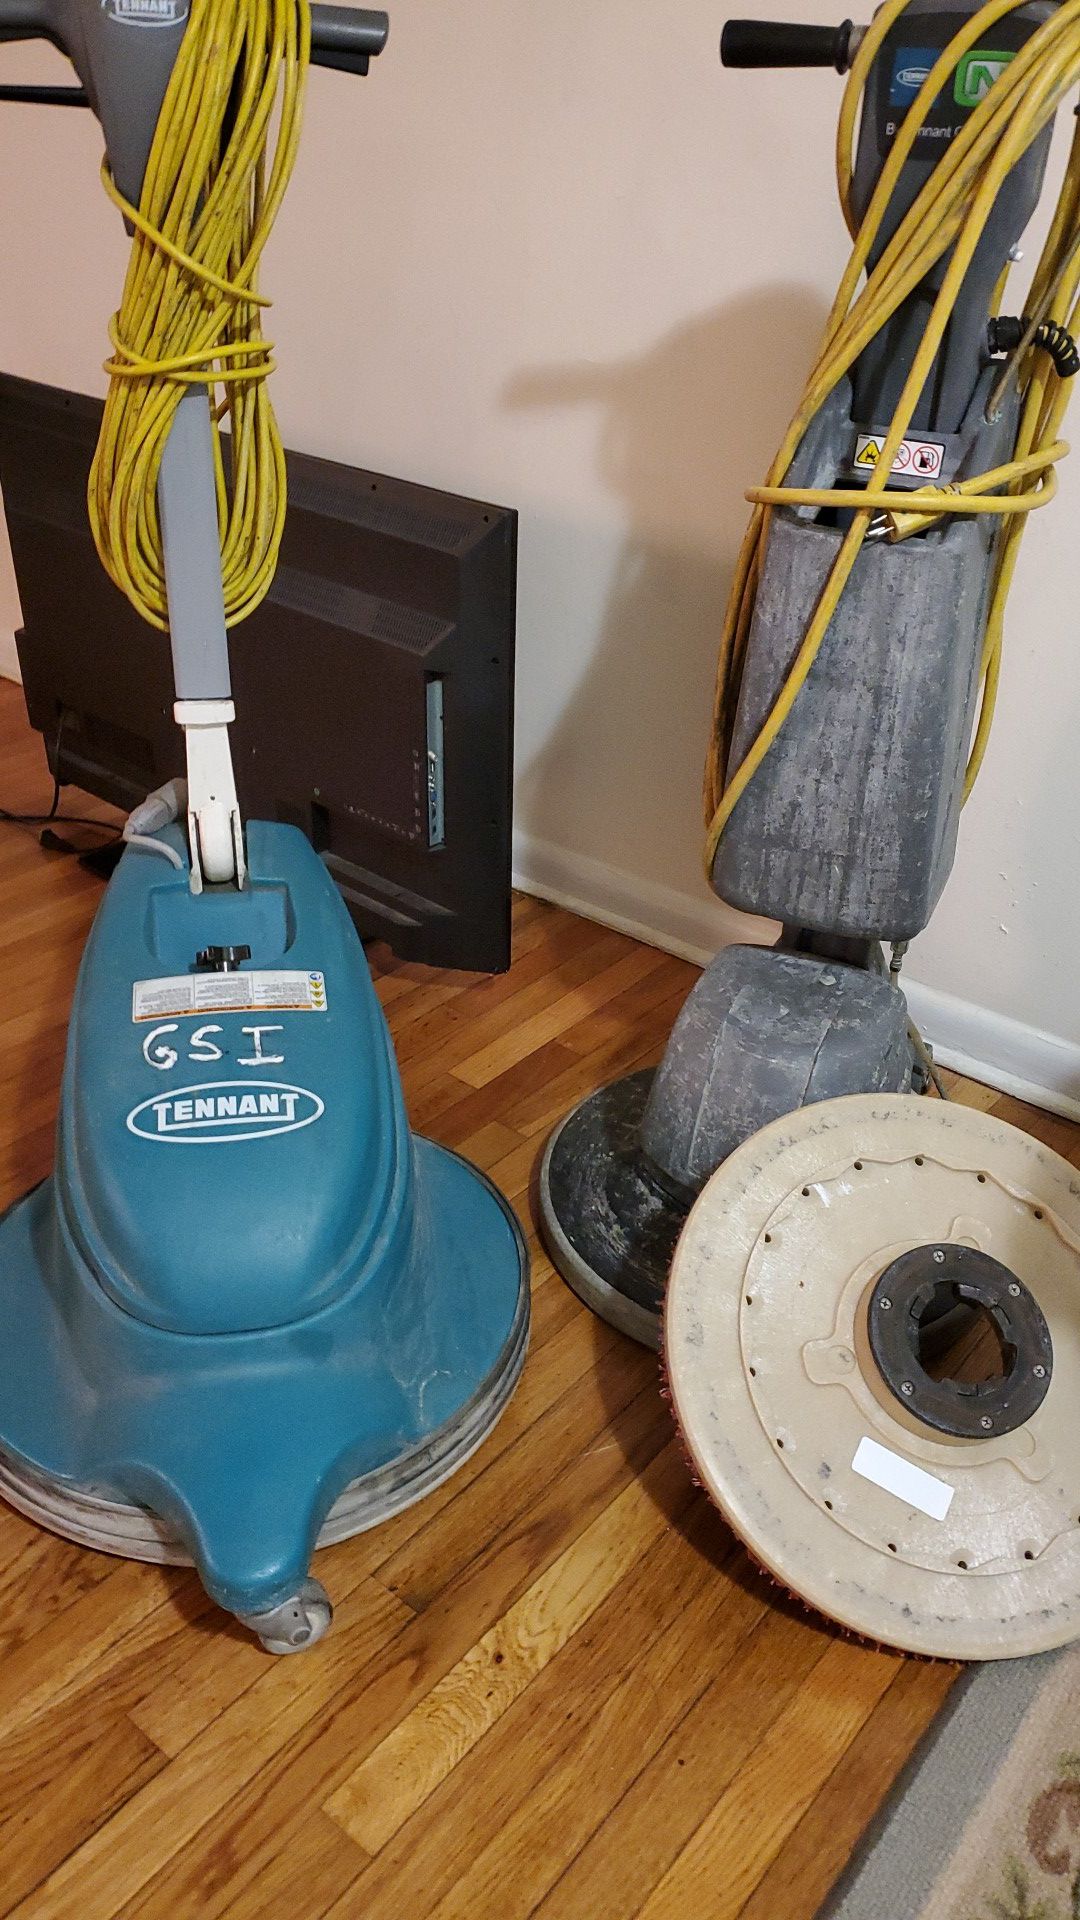 2 machines a floor polisher and carpet washing